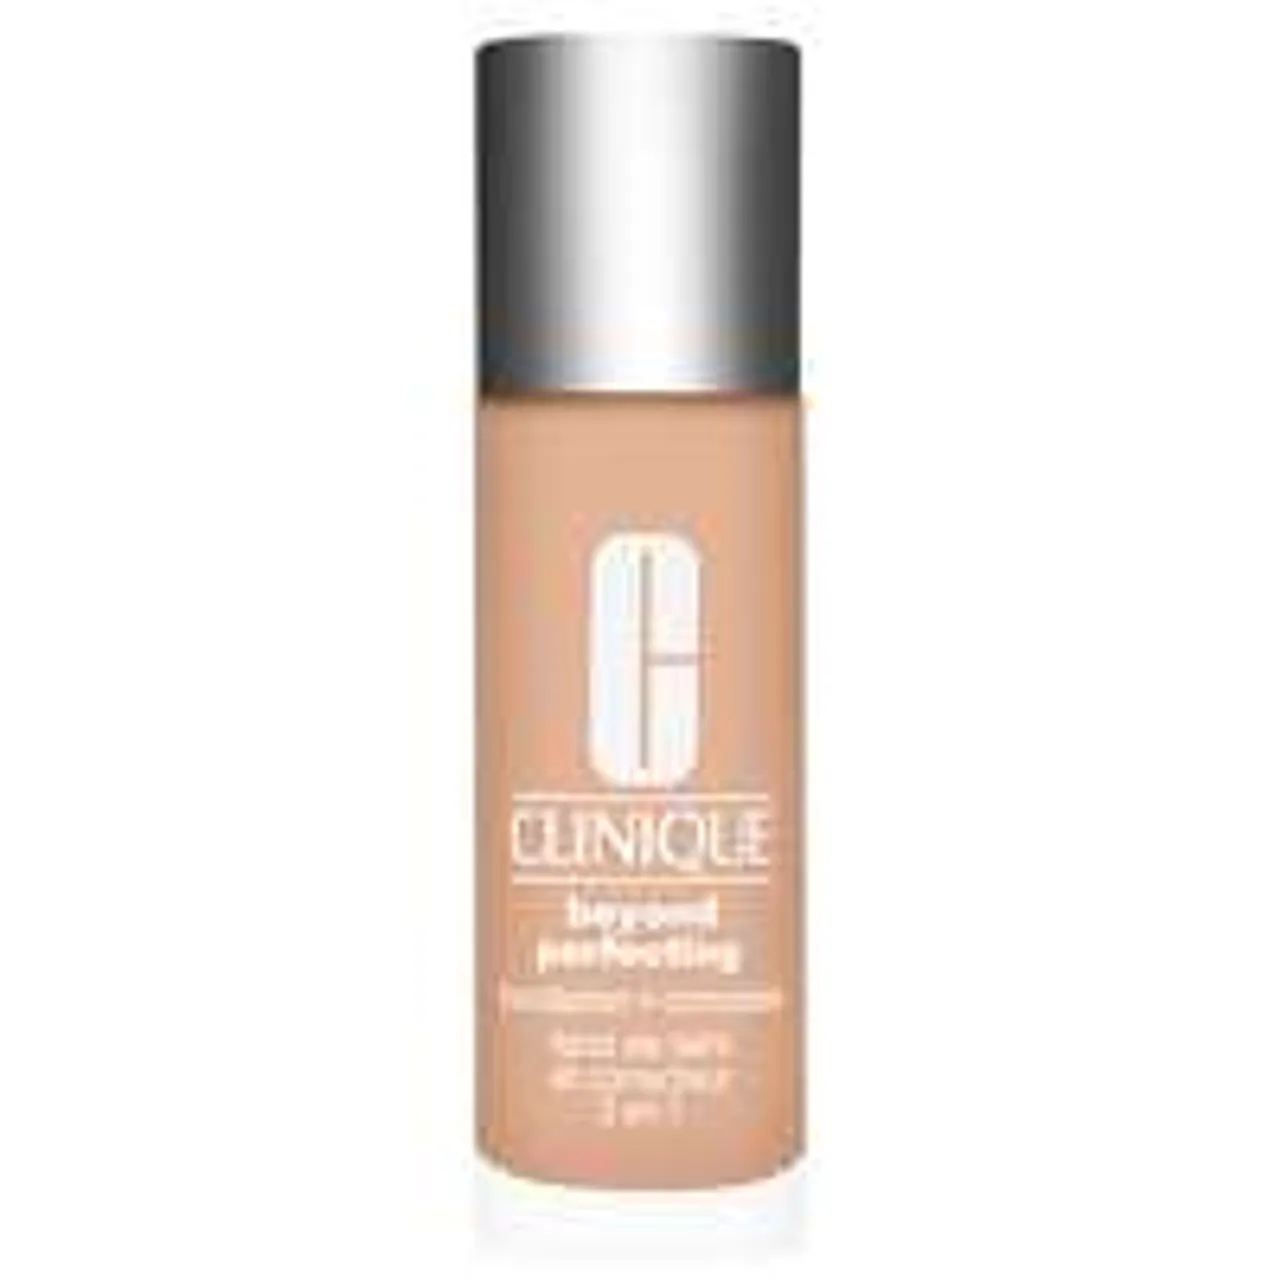 Clinique Beyond Perfecting Foundation + Concealer CN 28 Ivory 30ml / 1 fl.oz.